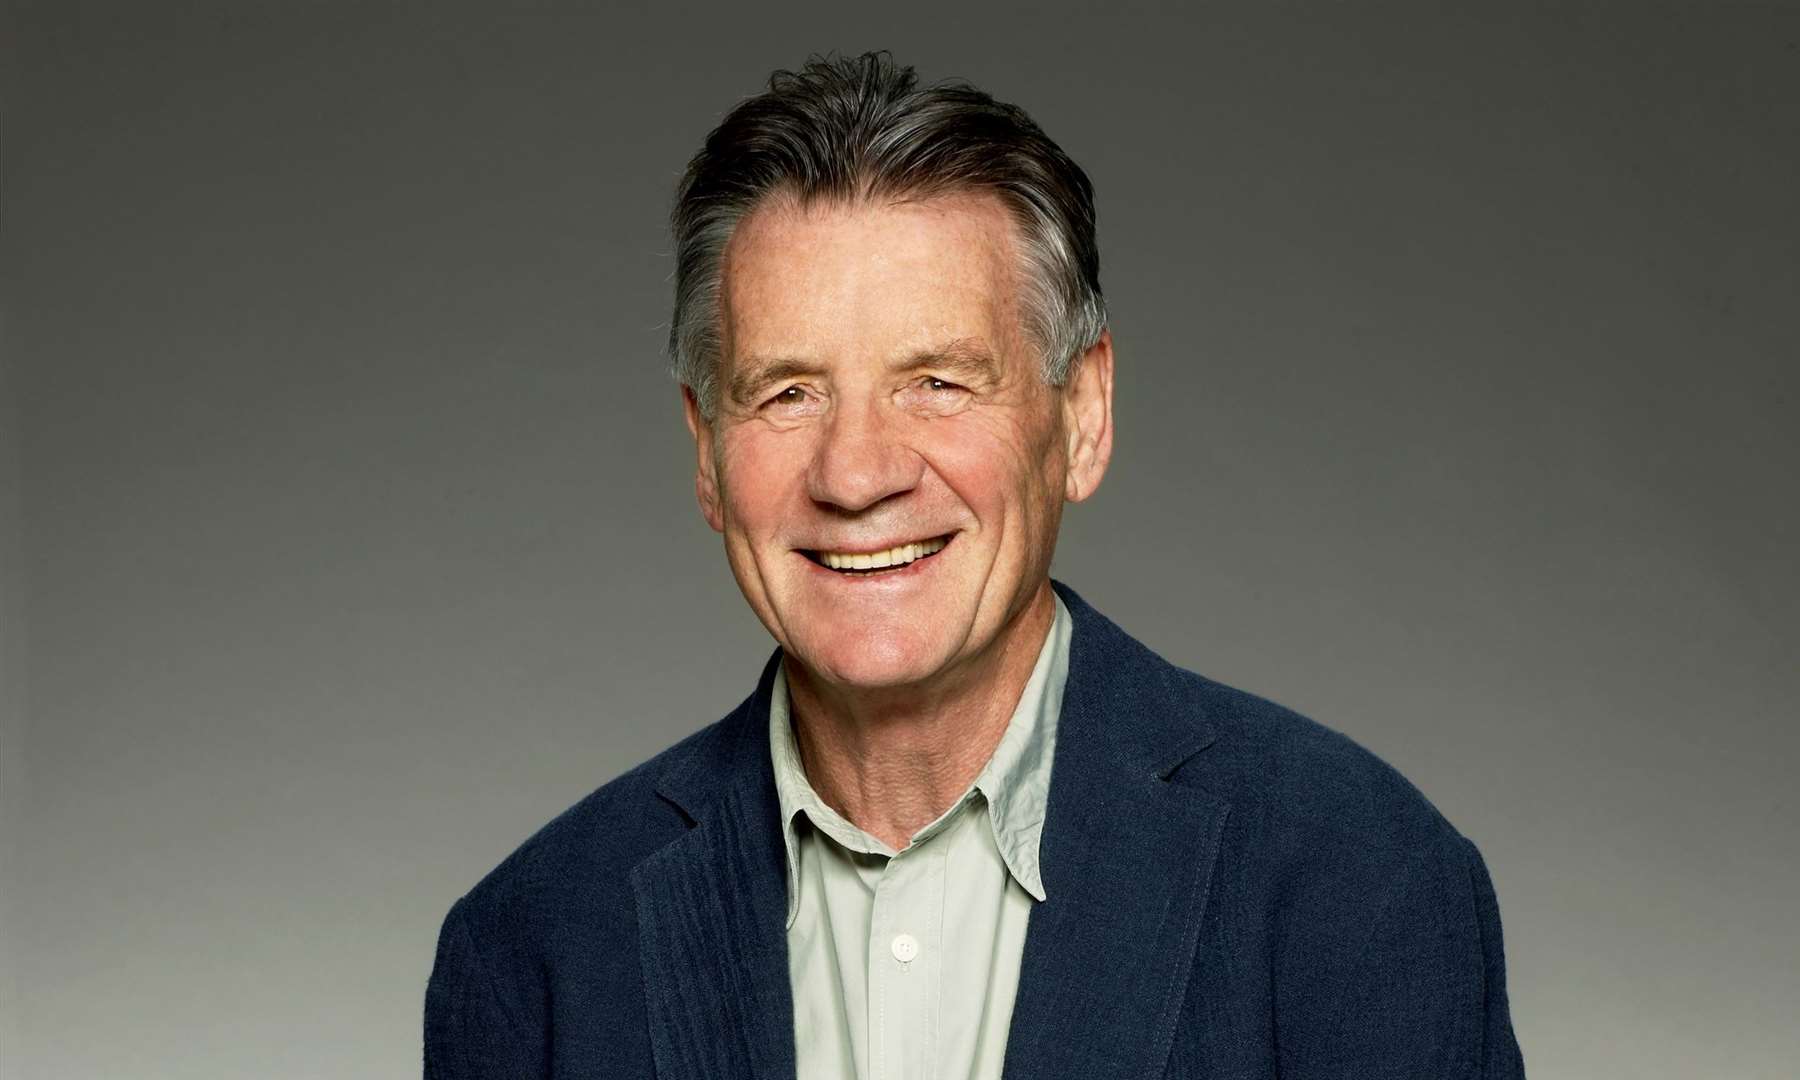 Travel presenter and actor Michael Palin is just one of the headliners appearing at this year’s Tunbridge Wells Literary Festival